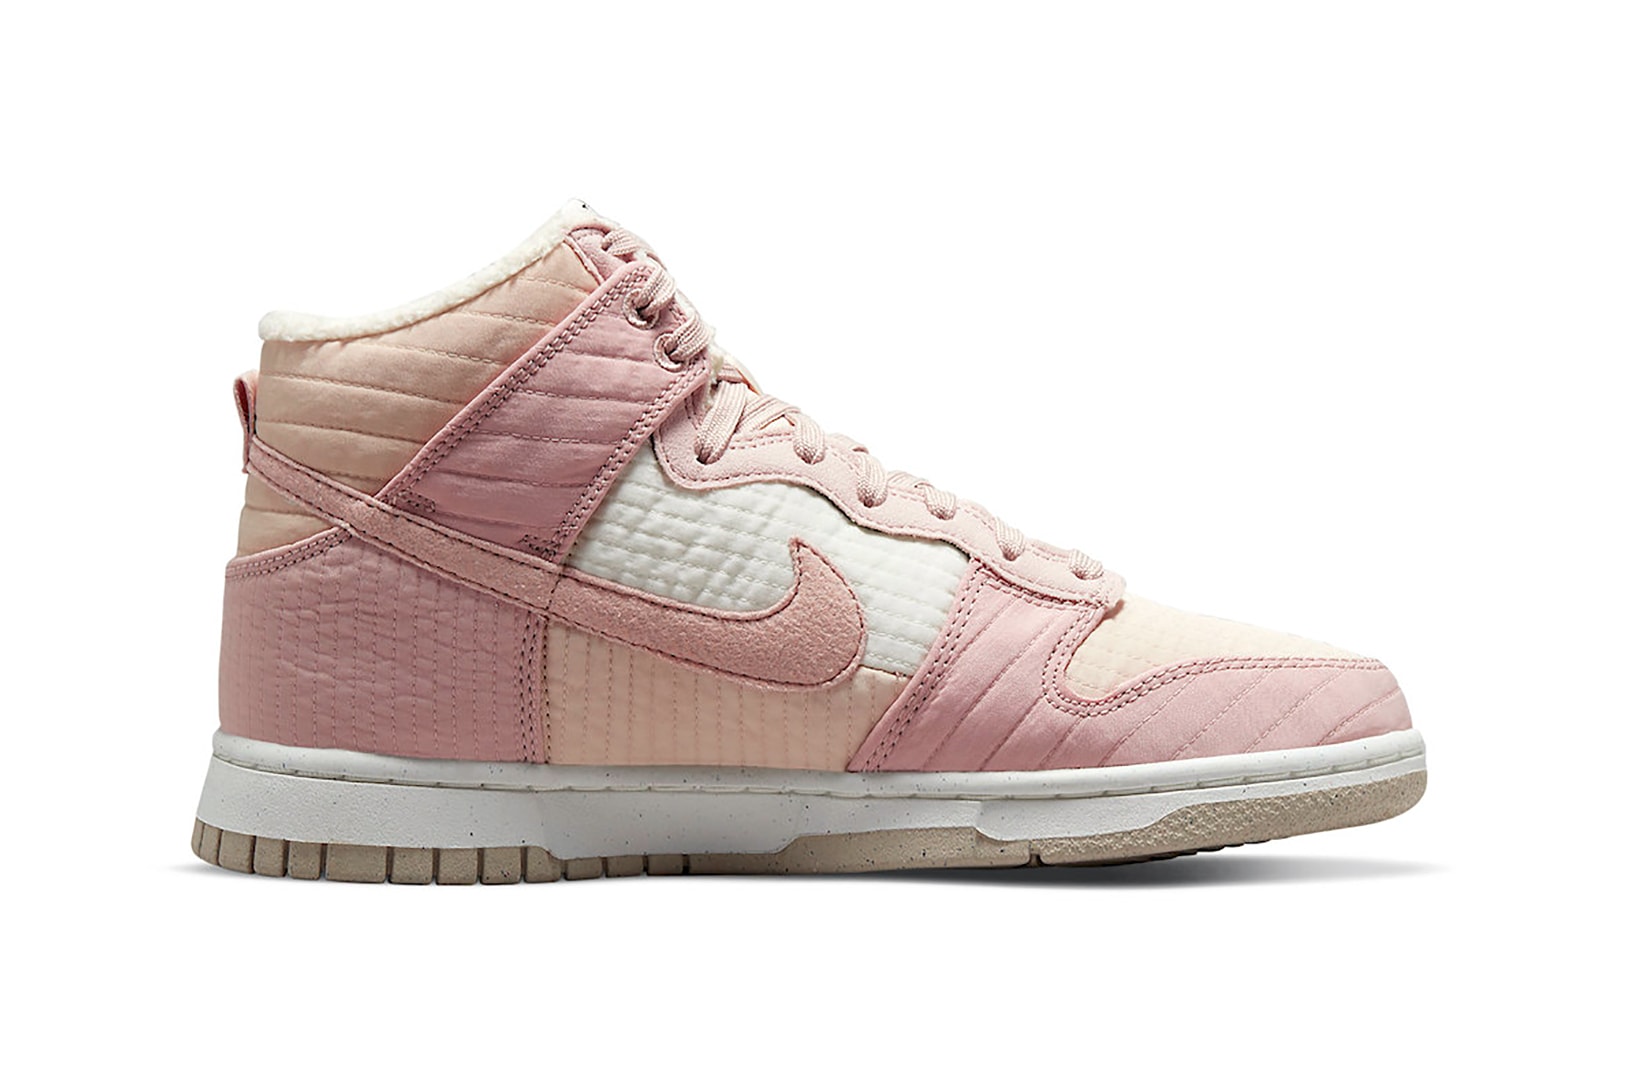 Nike Dunk High Toasty Pink White Womens Sneakers Shoes Kicks Footwear Sustainable Lateral